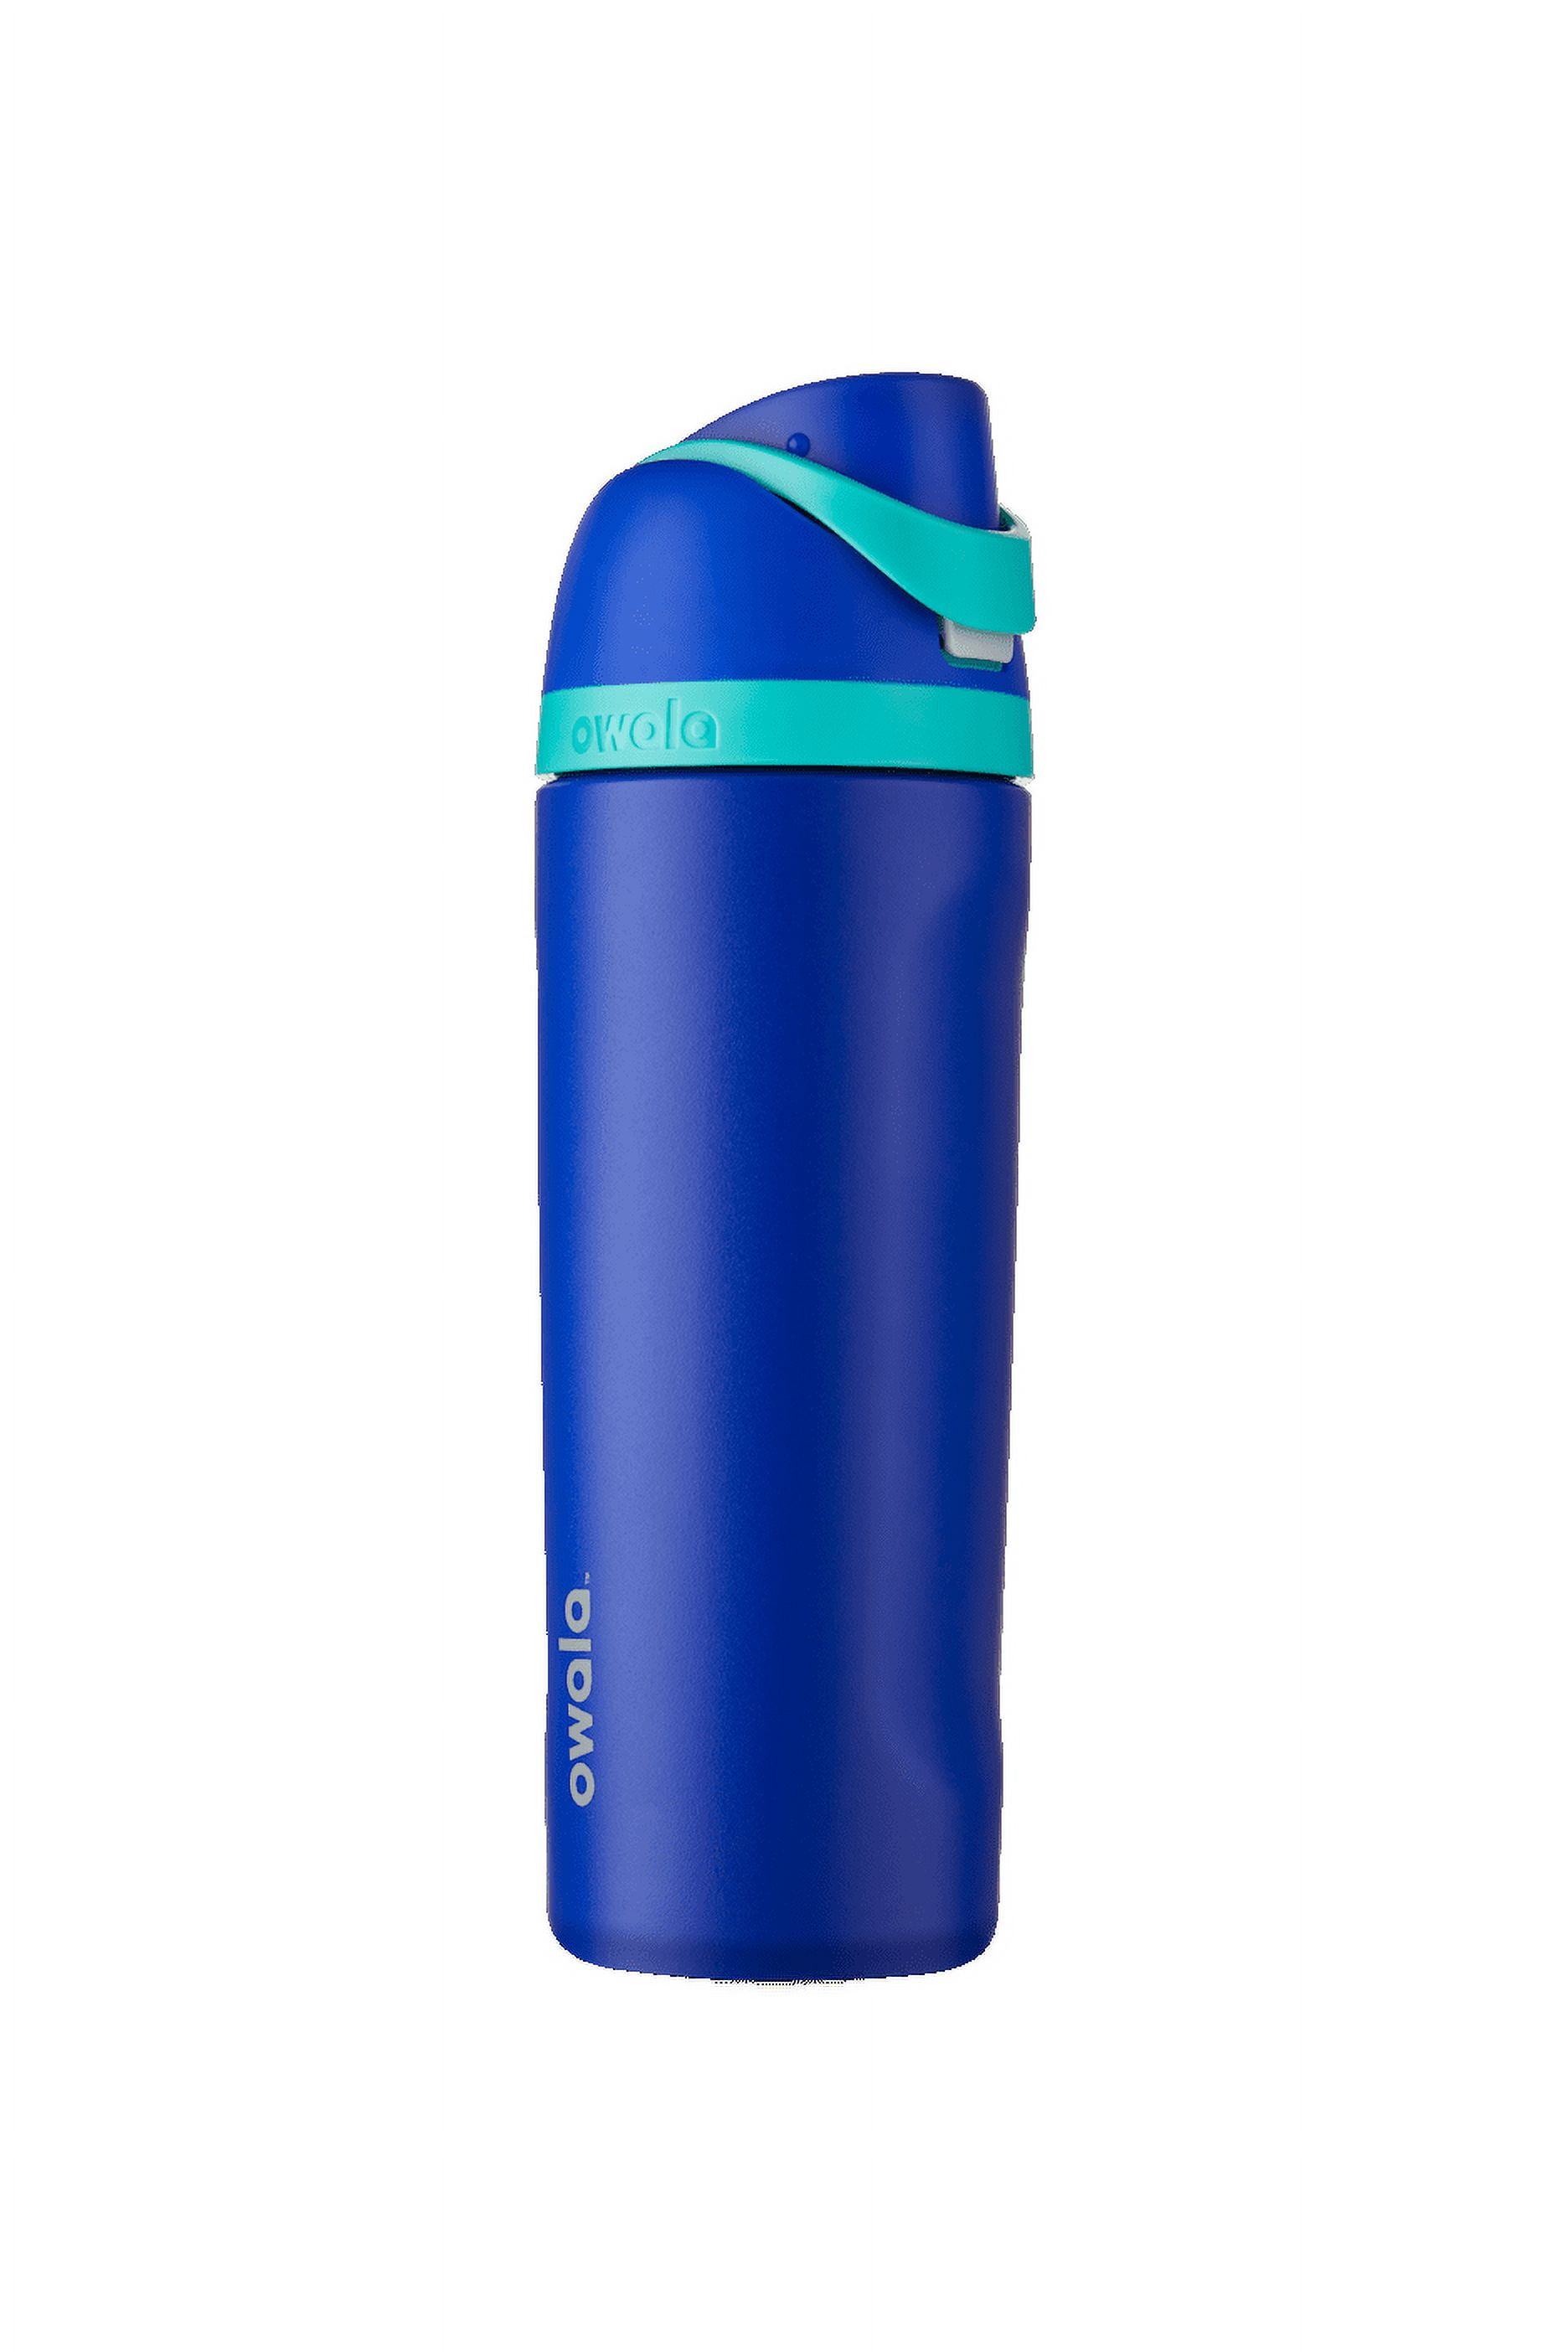 Owala FreeSip Stainless Steel Water Bottle / 40oz / Color: Blue Oasis